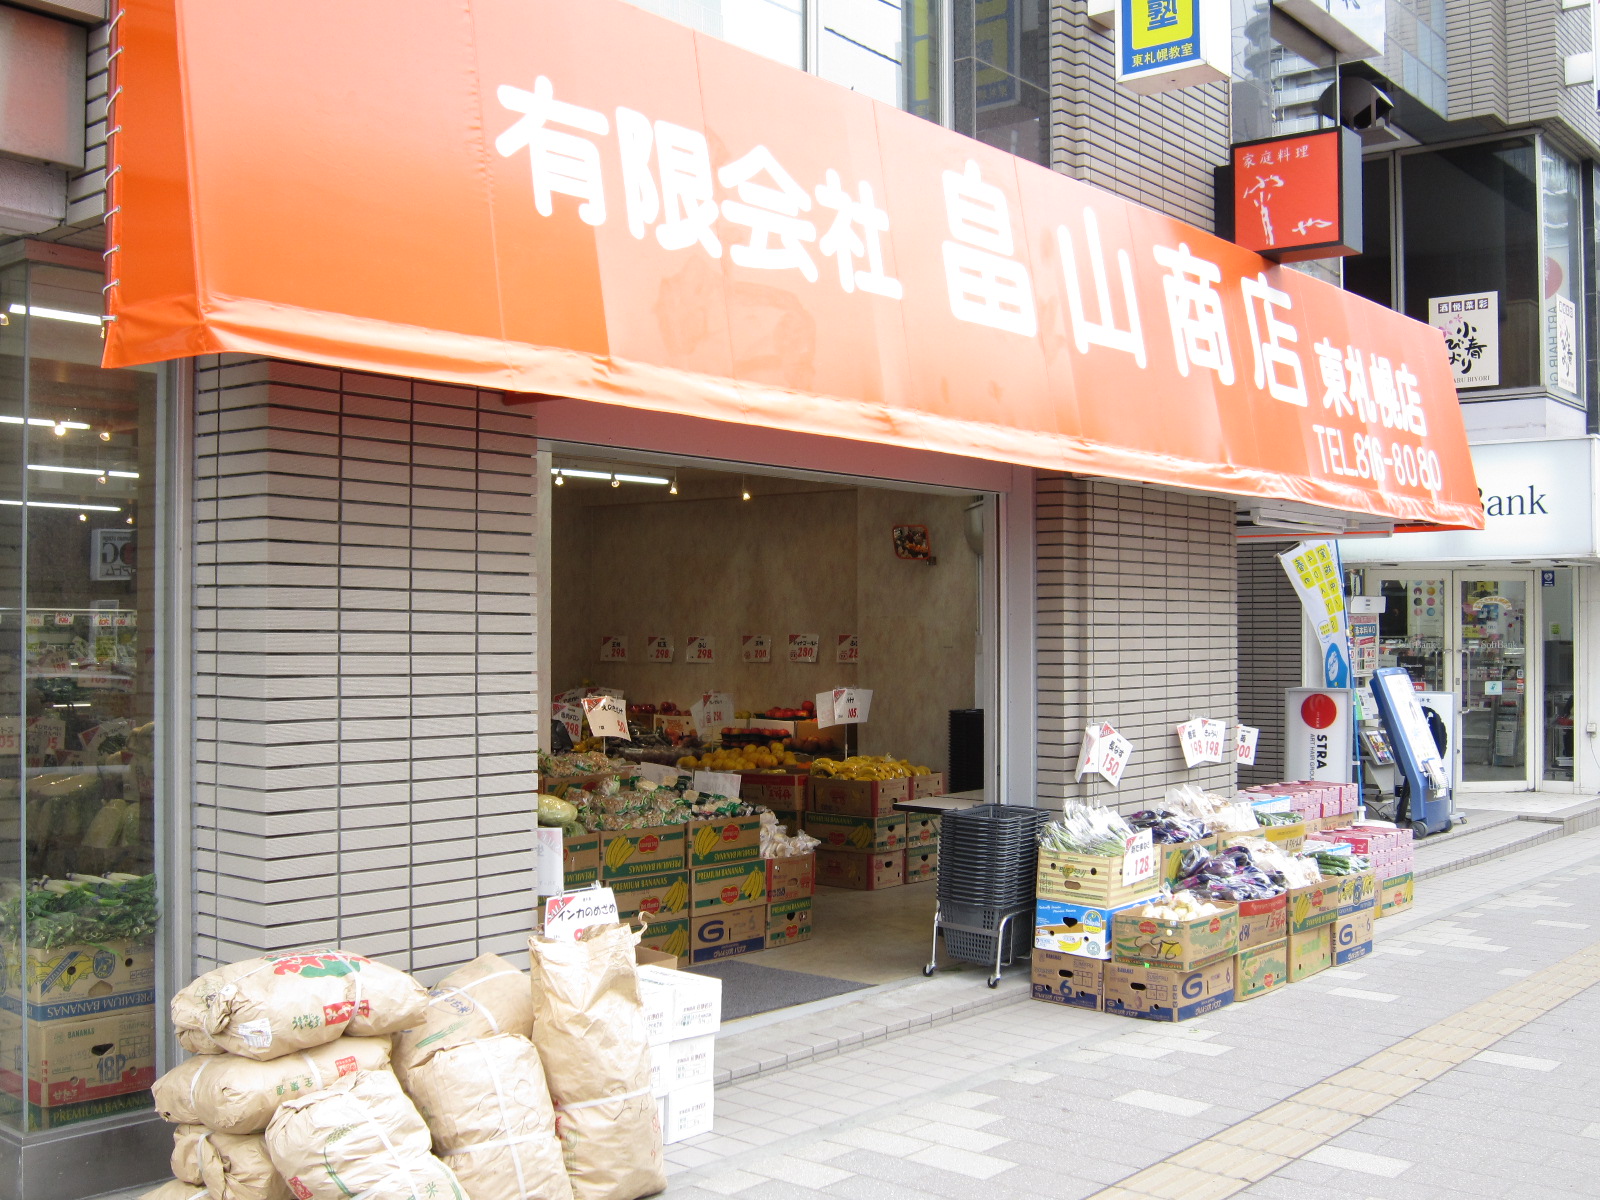 Other. Hatakeyama shop 850m until (greengrocer's) (Other)